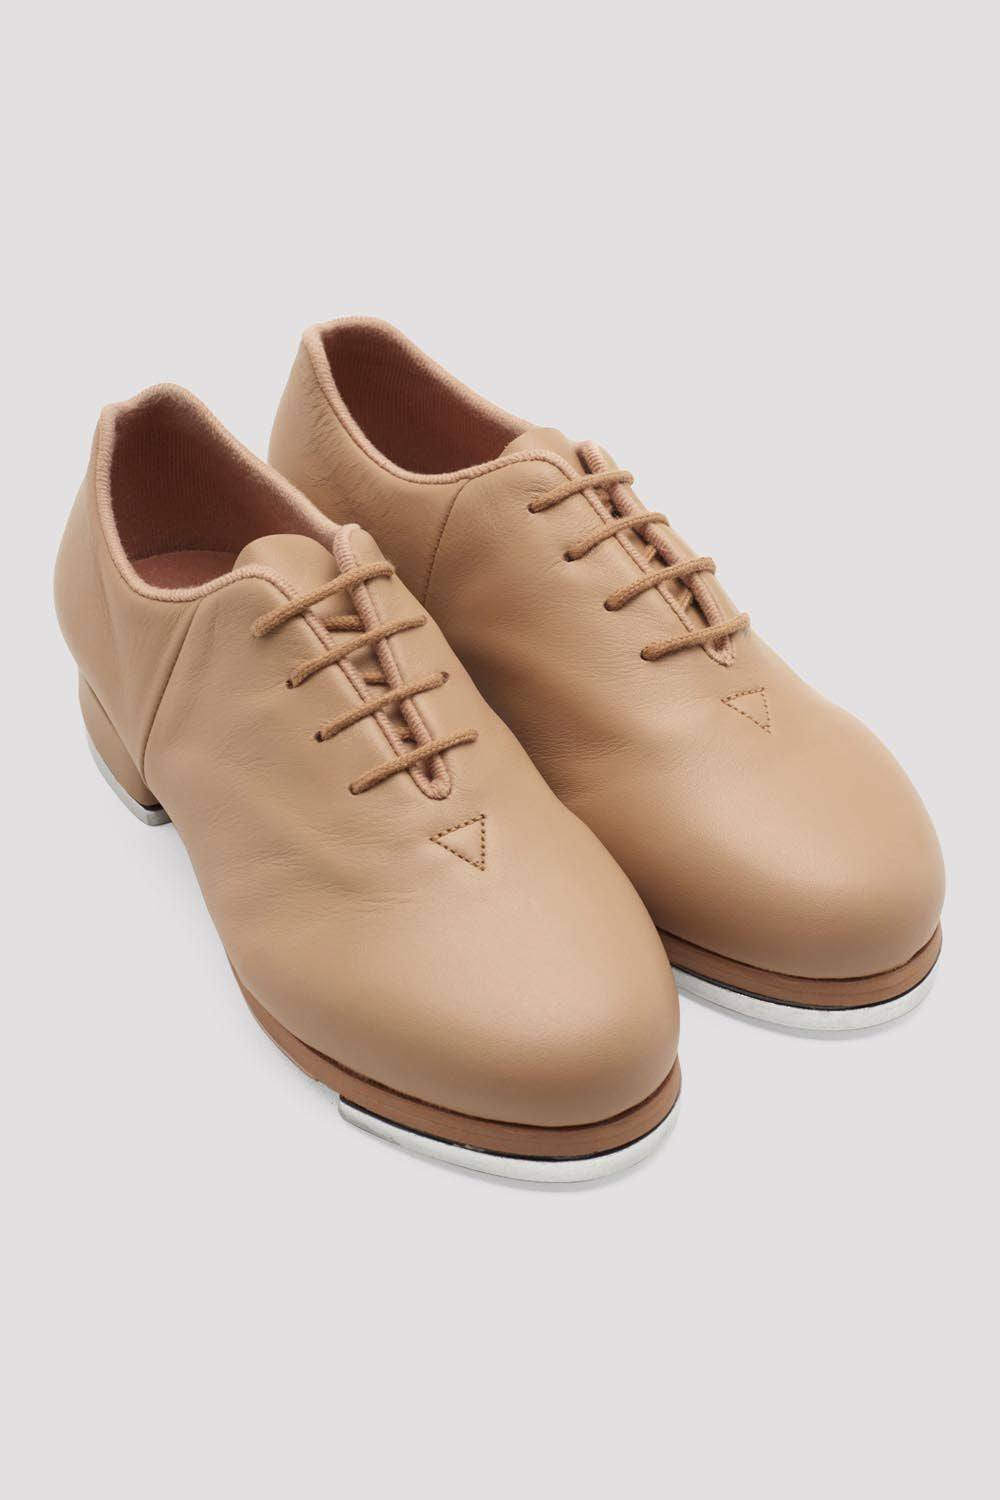 Sync Tap Leather Tap Shoes (Bloch S0321)